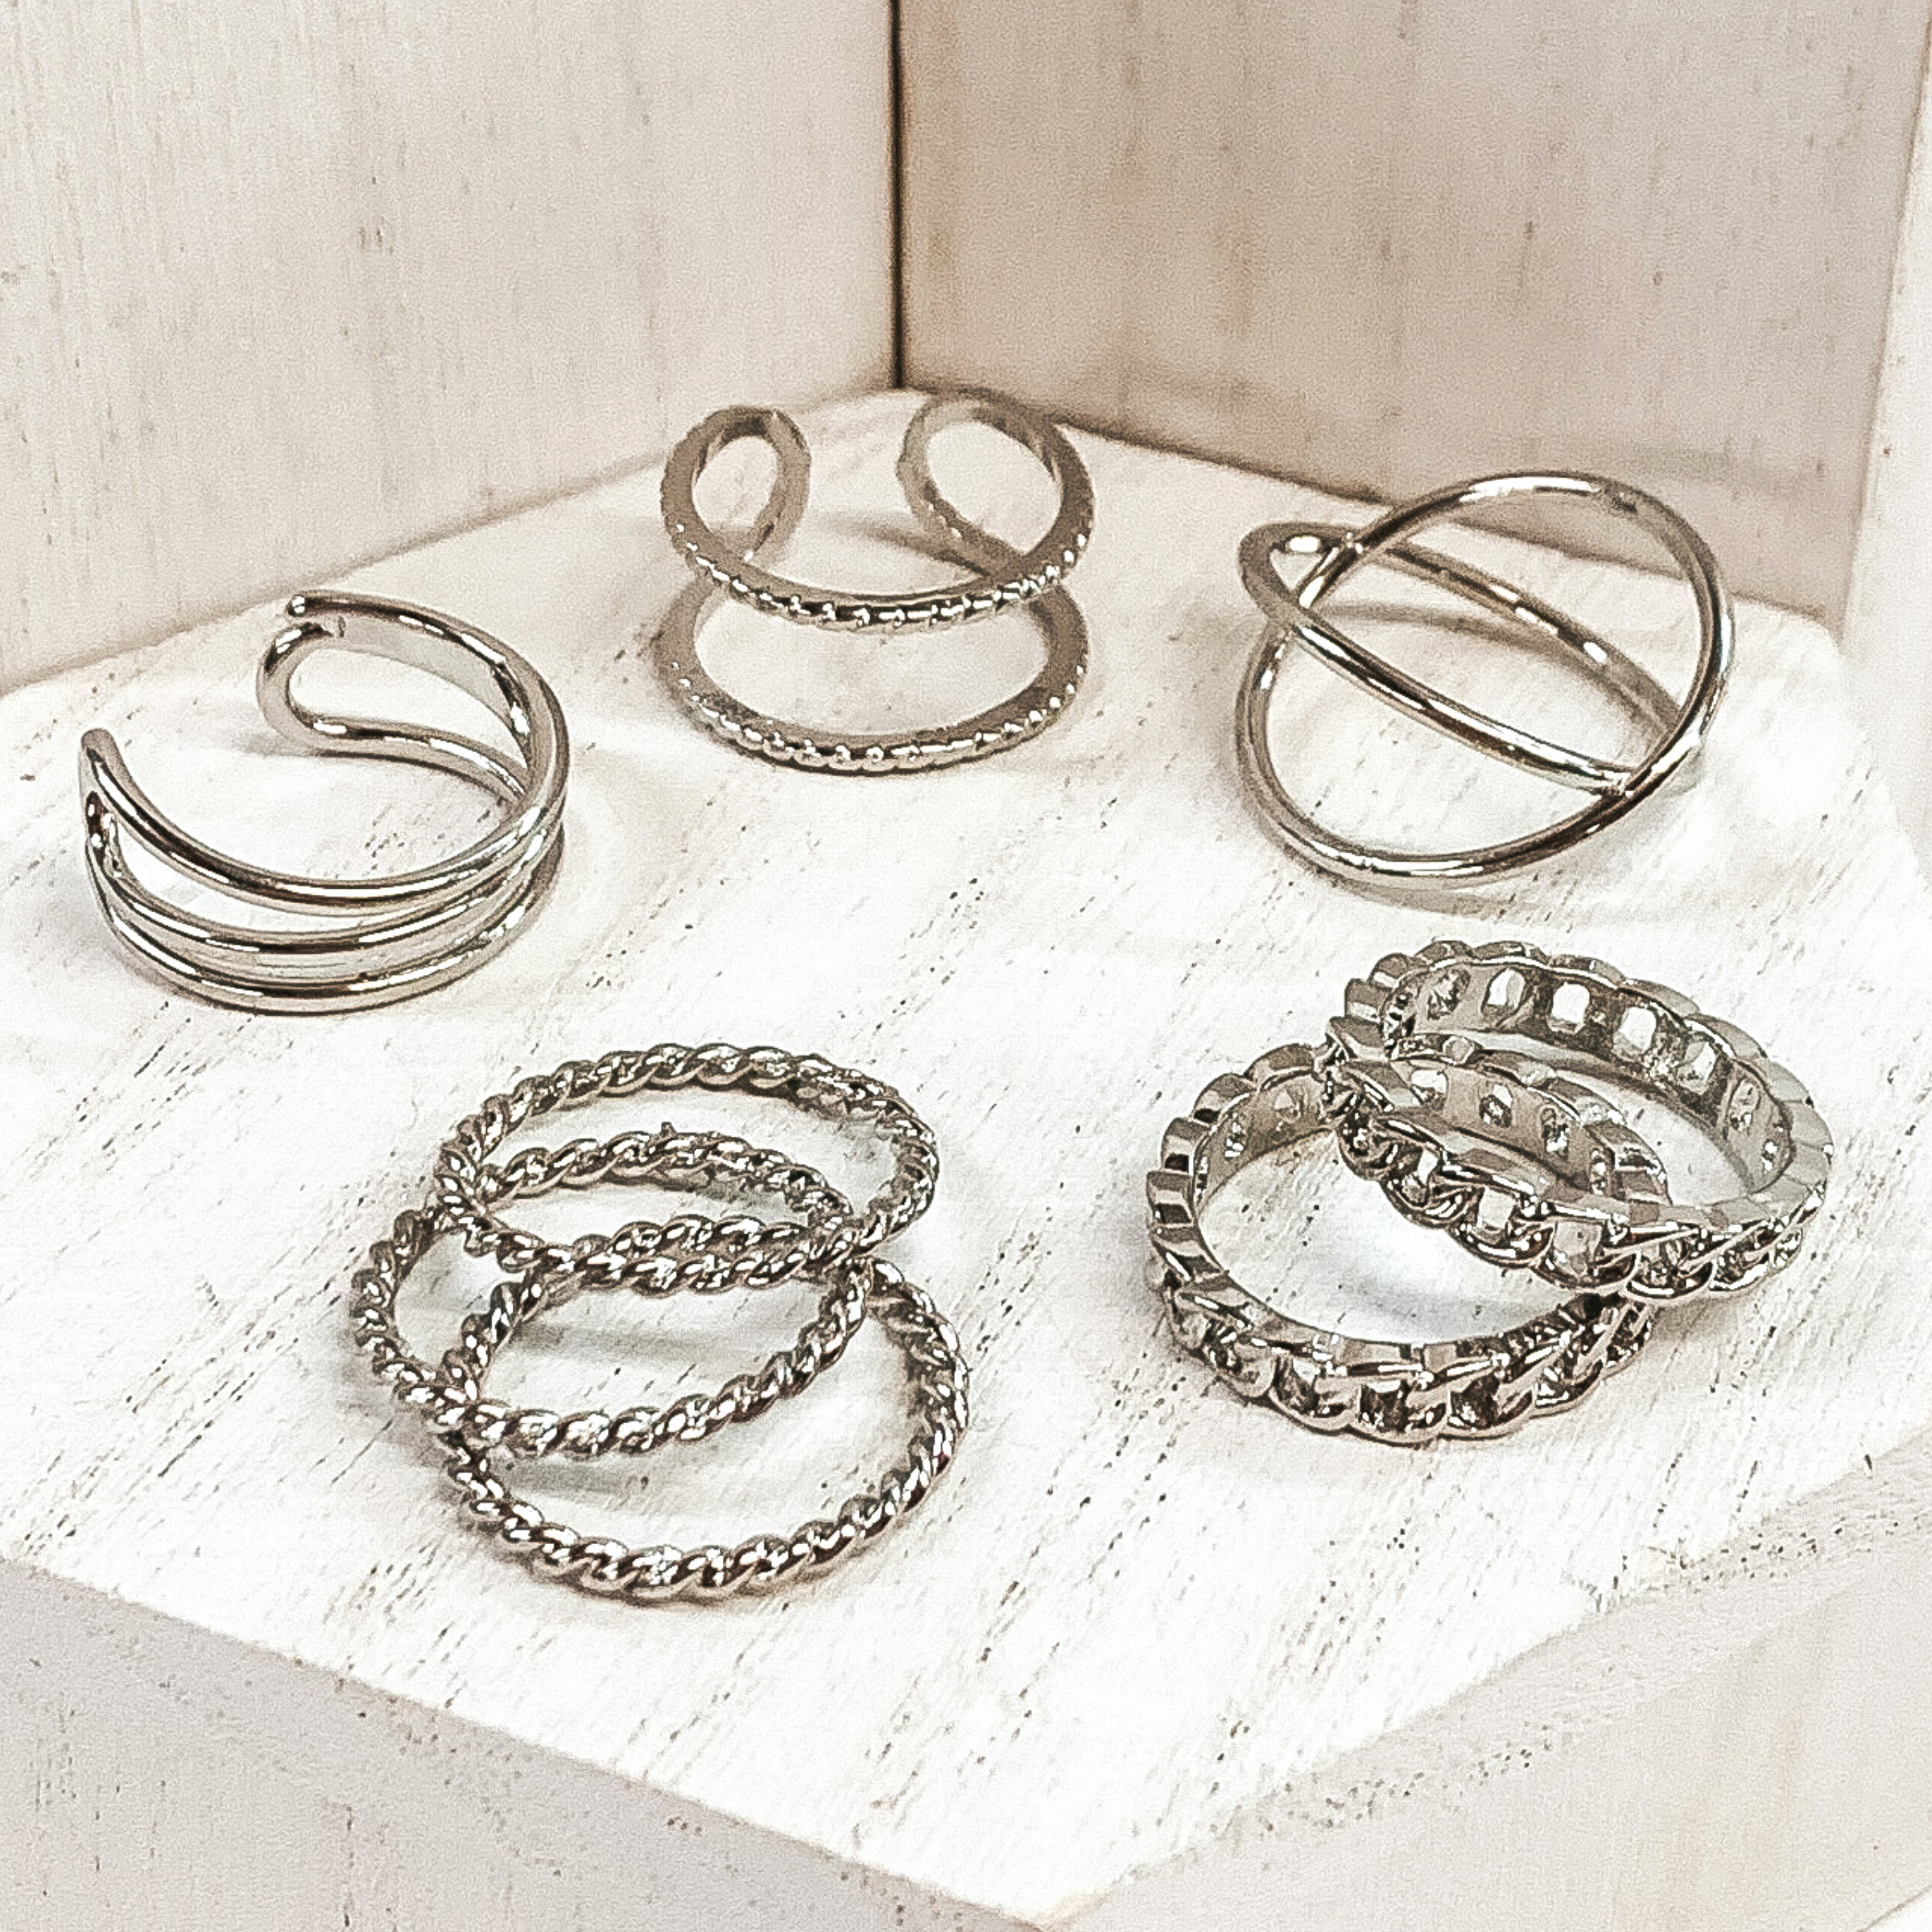 This is a eight piece silver ring set. Three rings are double in unique ways, there are three thin twisted rings, and the last two are chained rings. These rings are pictured on a white background. 